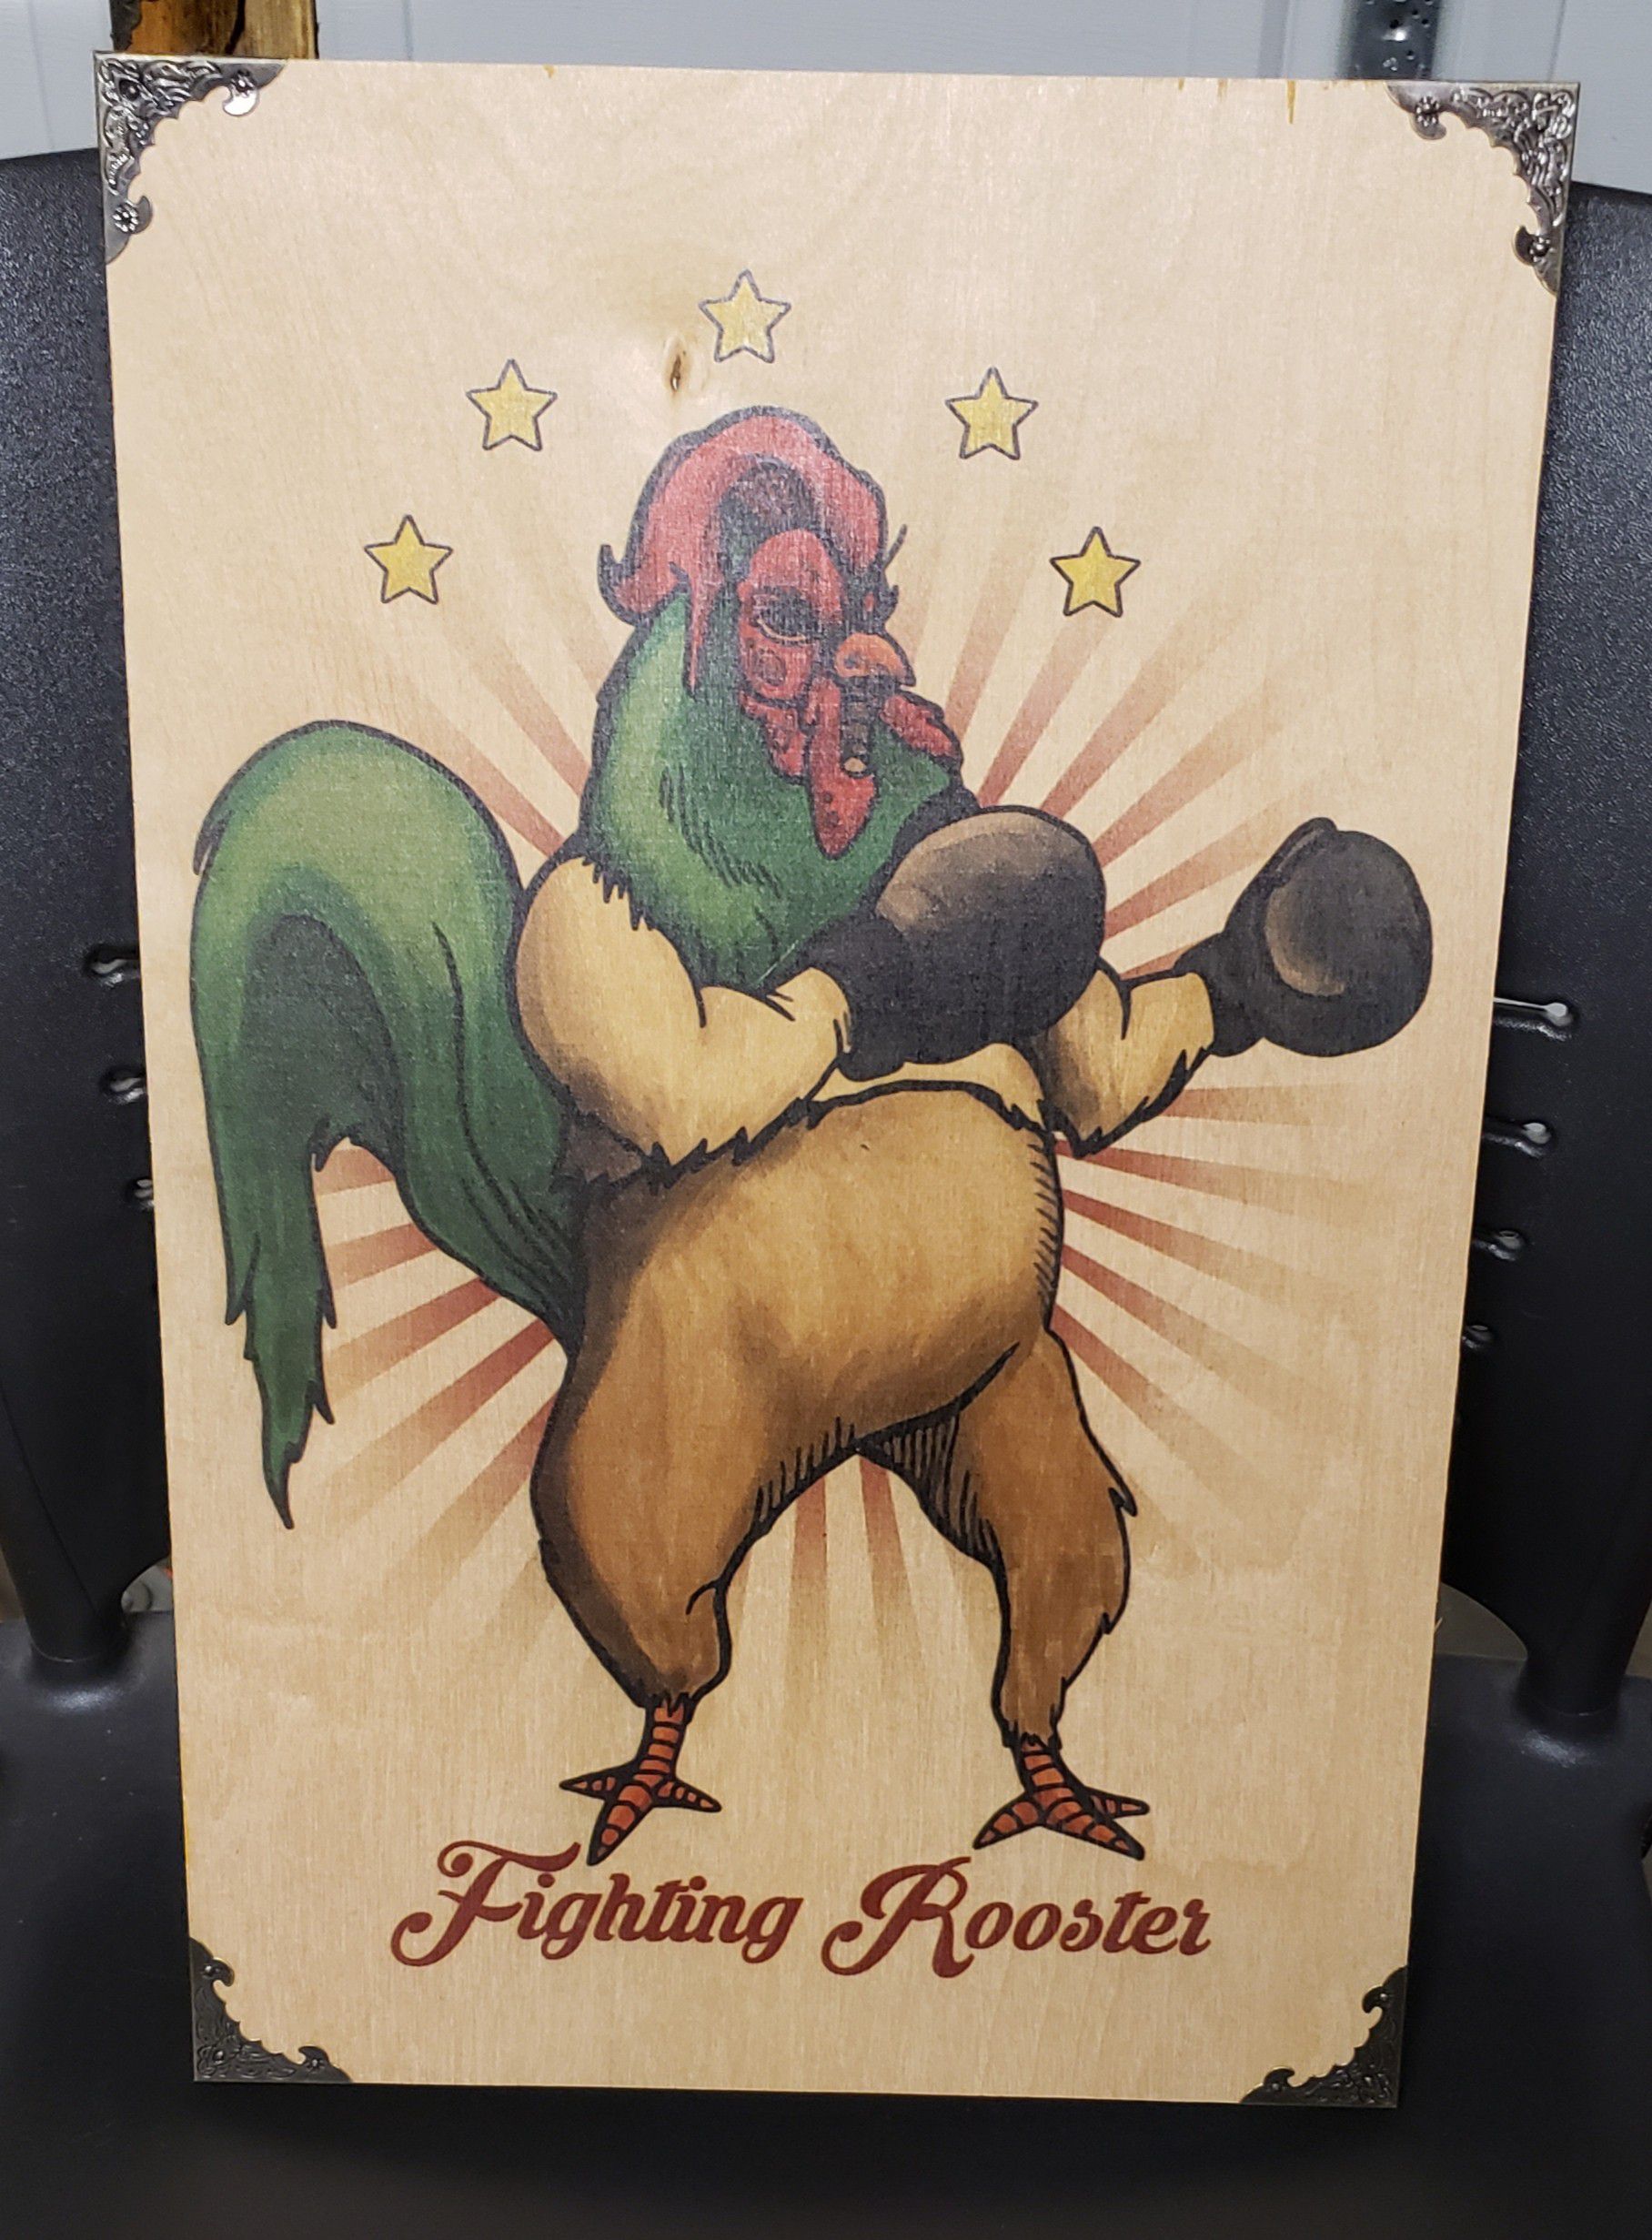 18" x 12" Boxing Rooster Art Decor